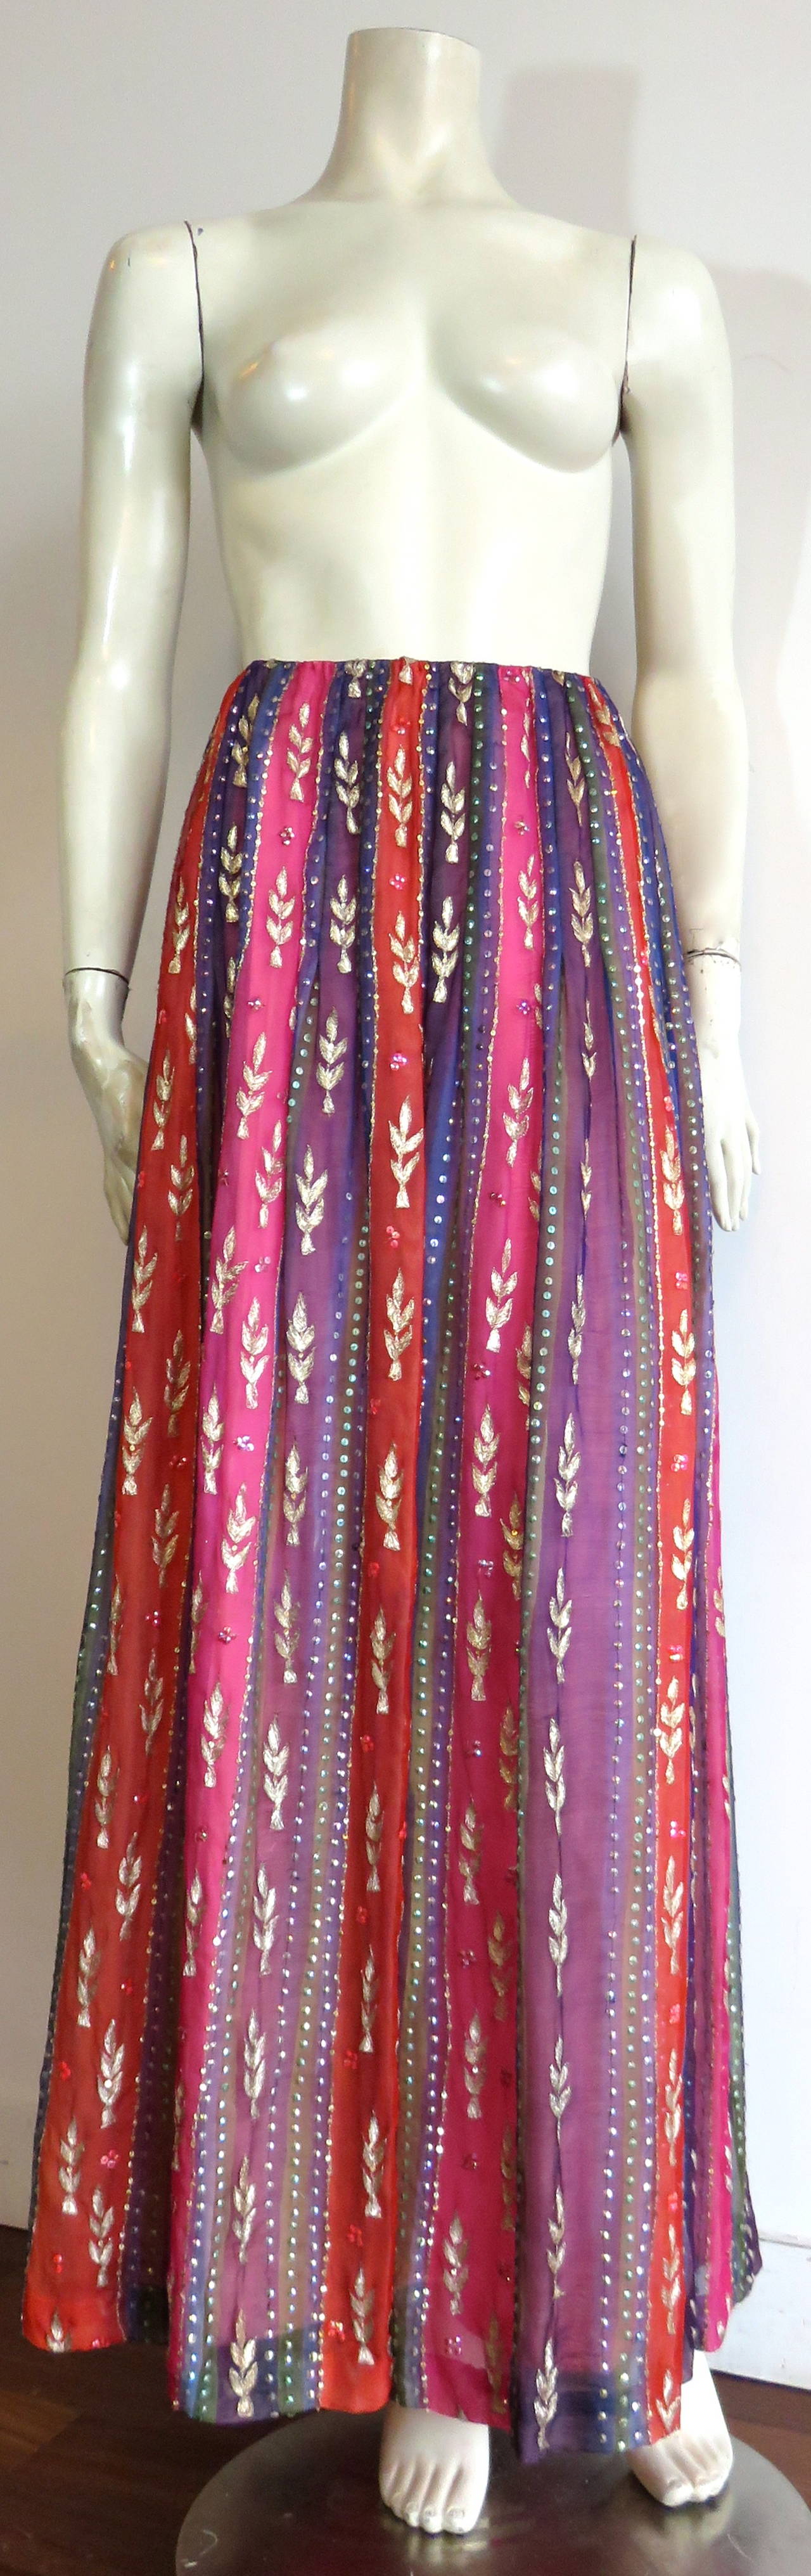 1970's GIVENCHY Haute Couture embellished silk skirt In Excellent Condition For Sale In Newport Beach, CA